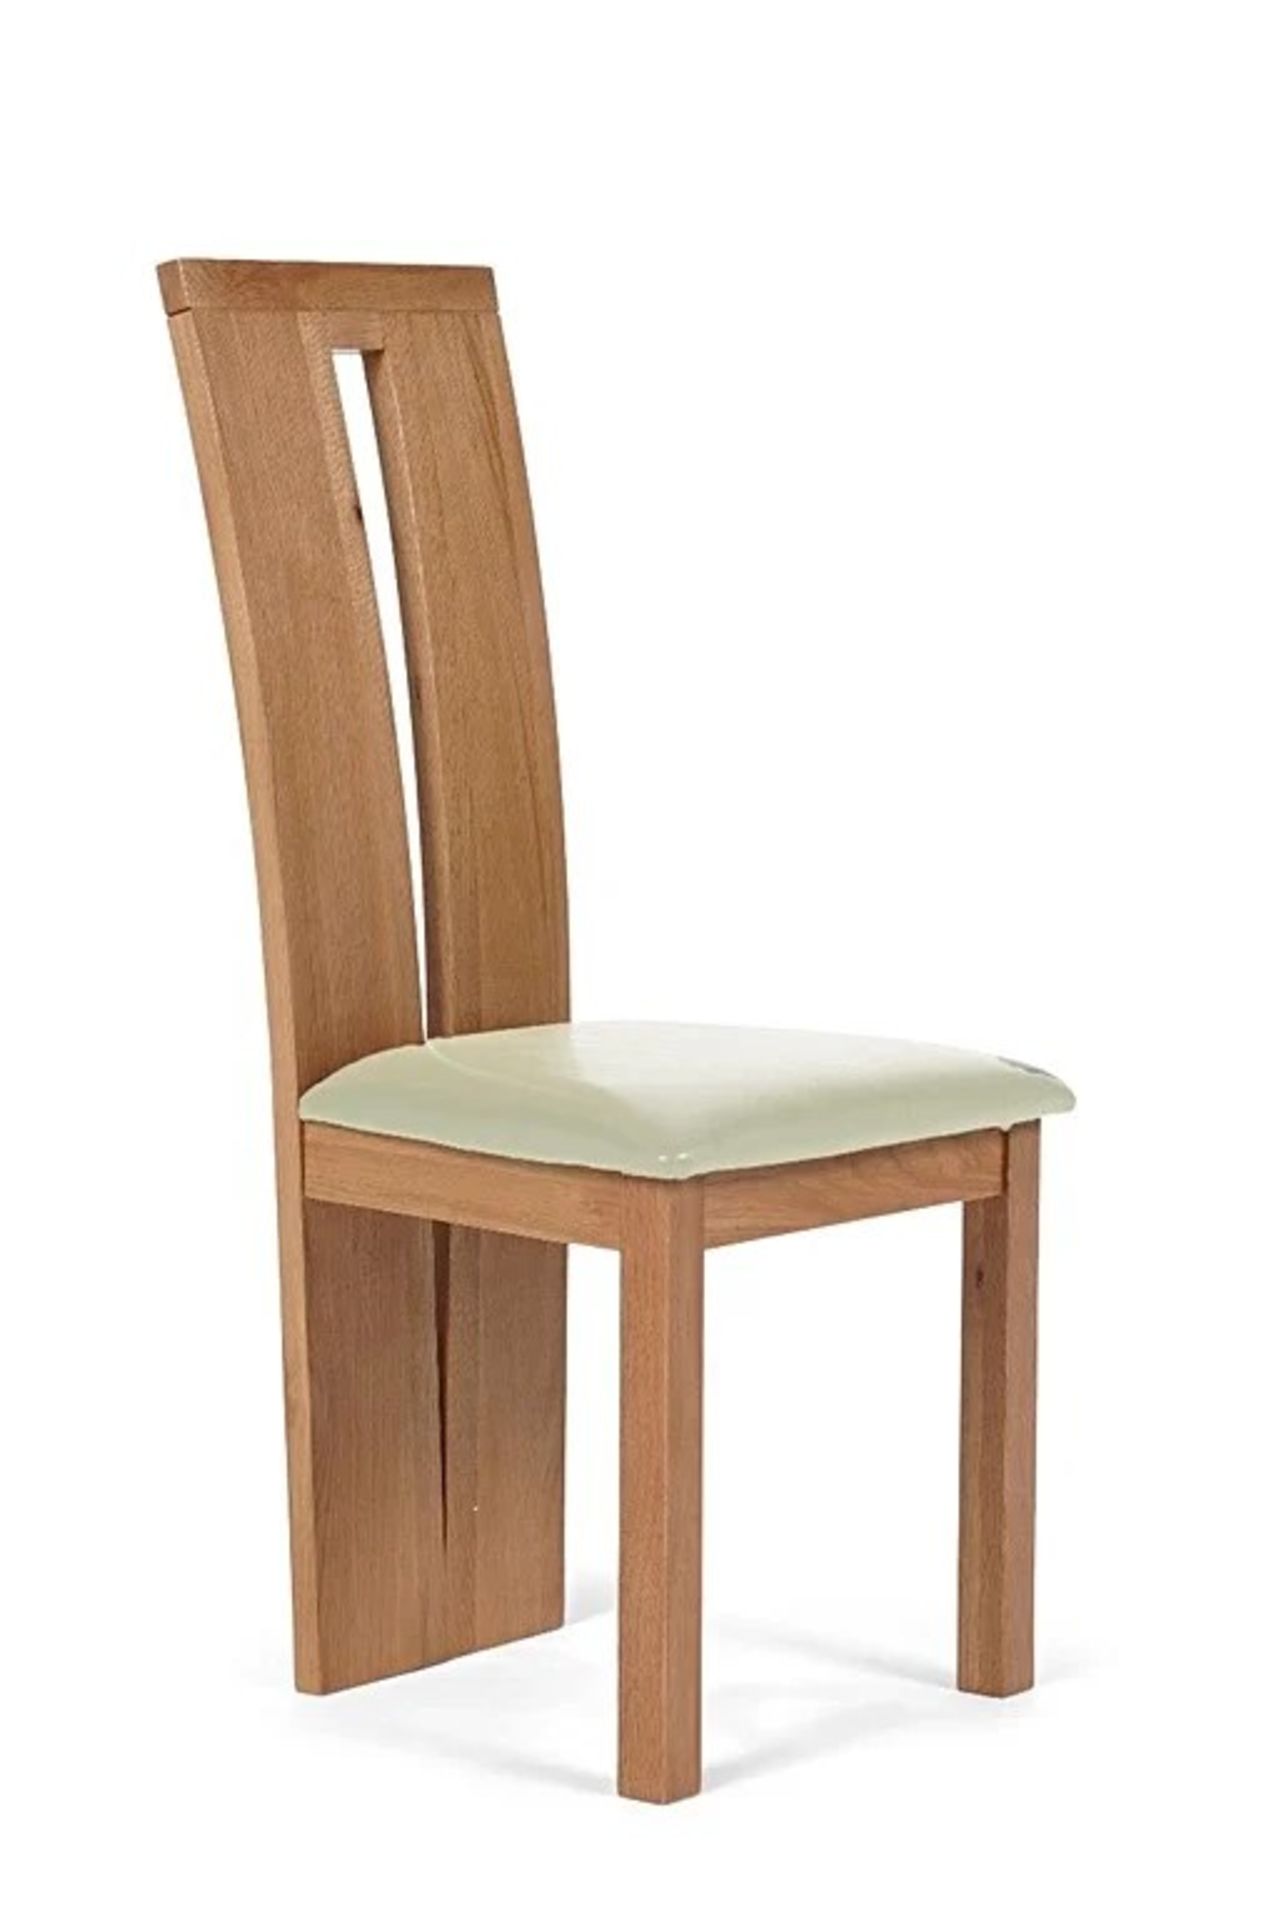 A set of 4 x Montreal Solid Oak and Cream Dining Chairs give your dining area a touch of Canadian